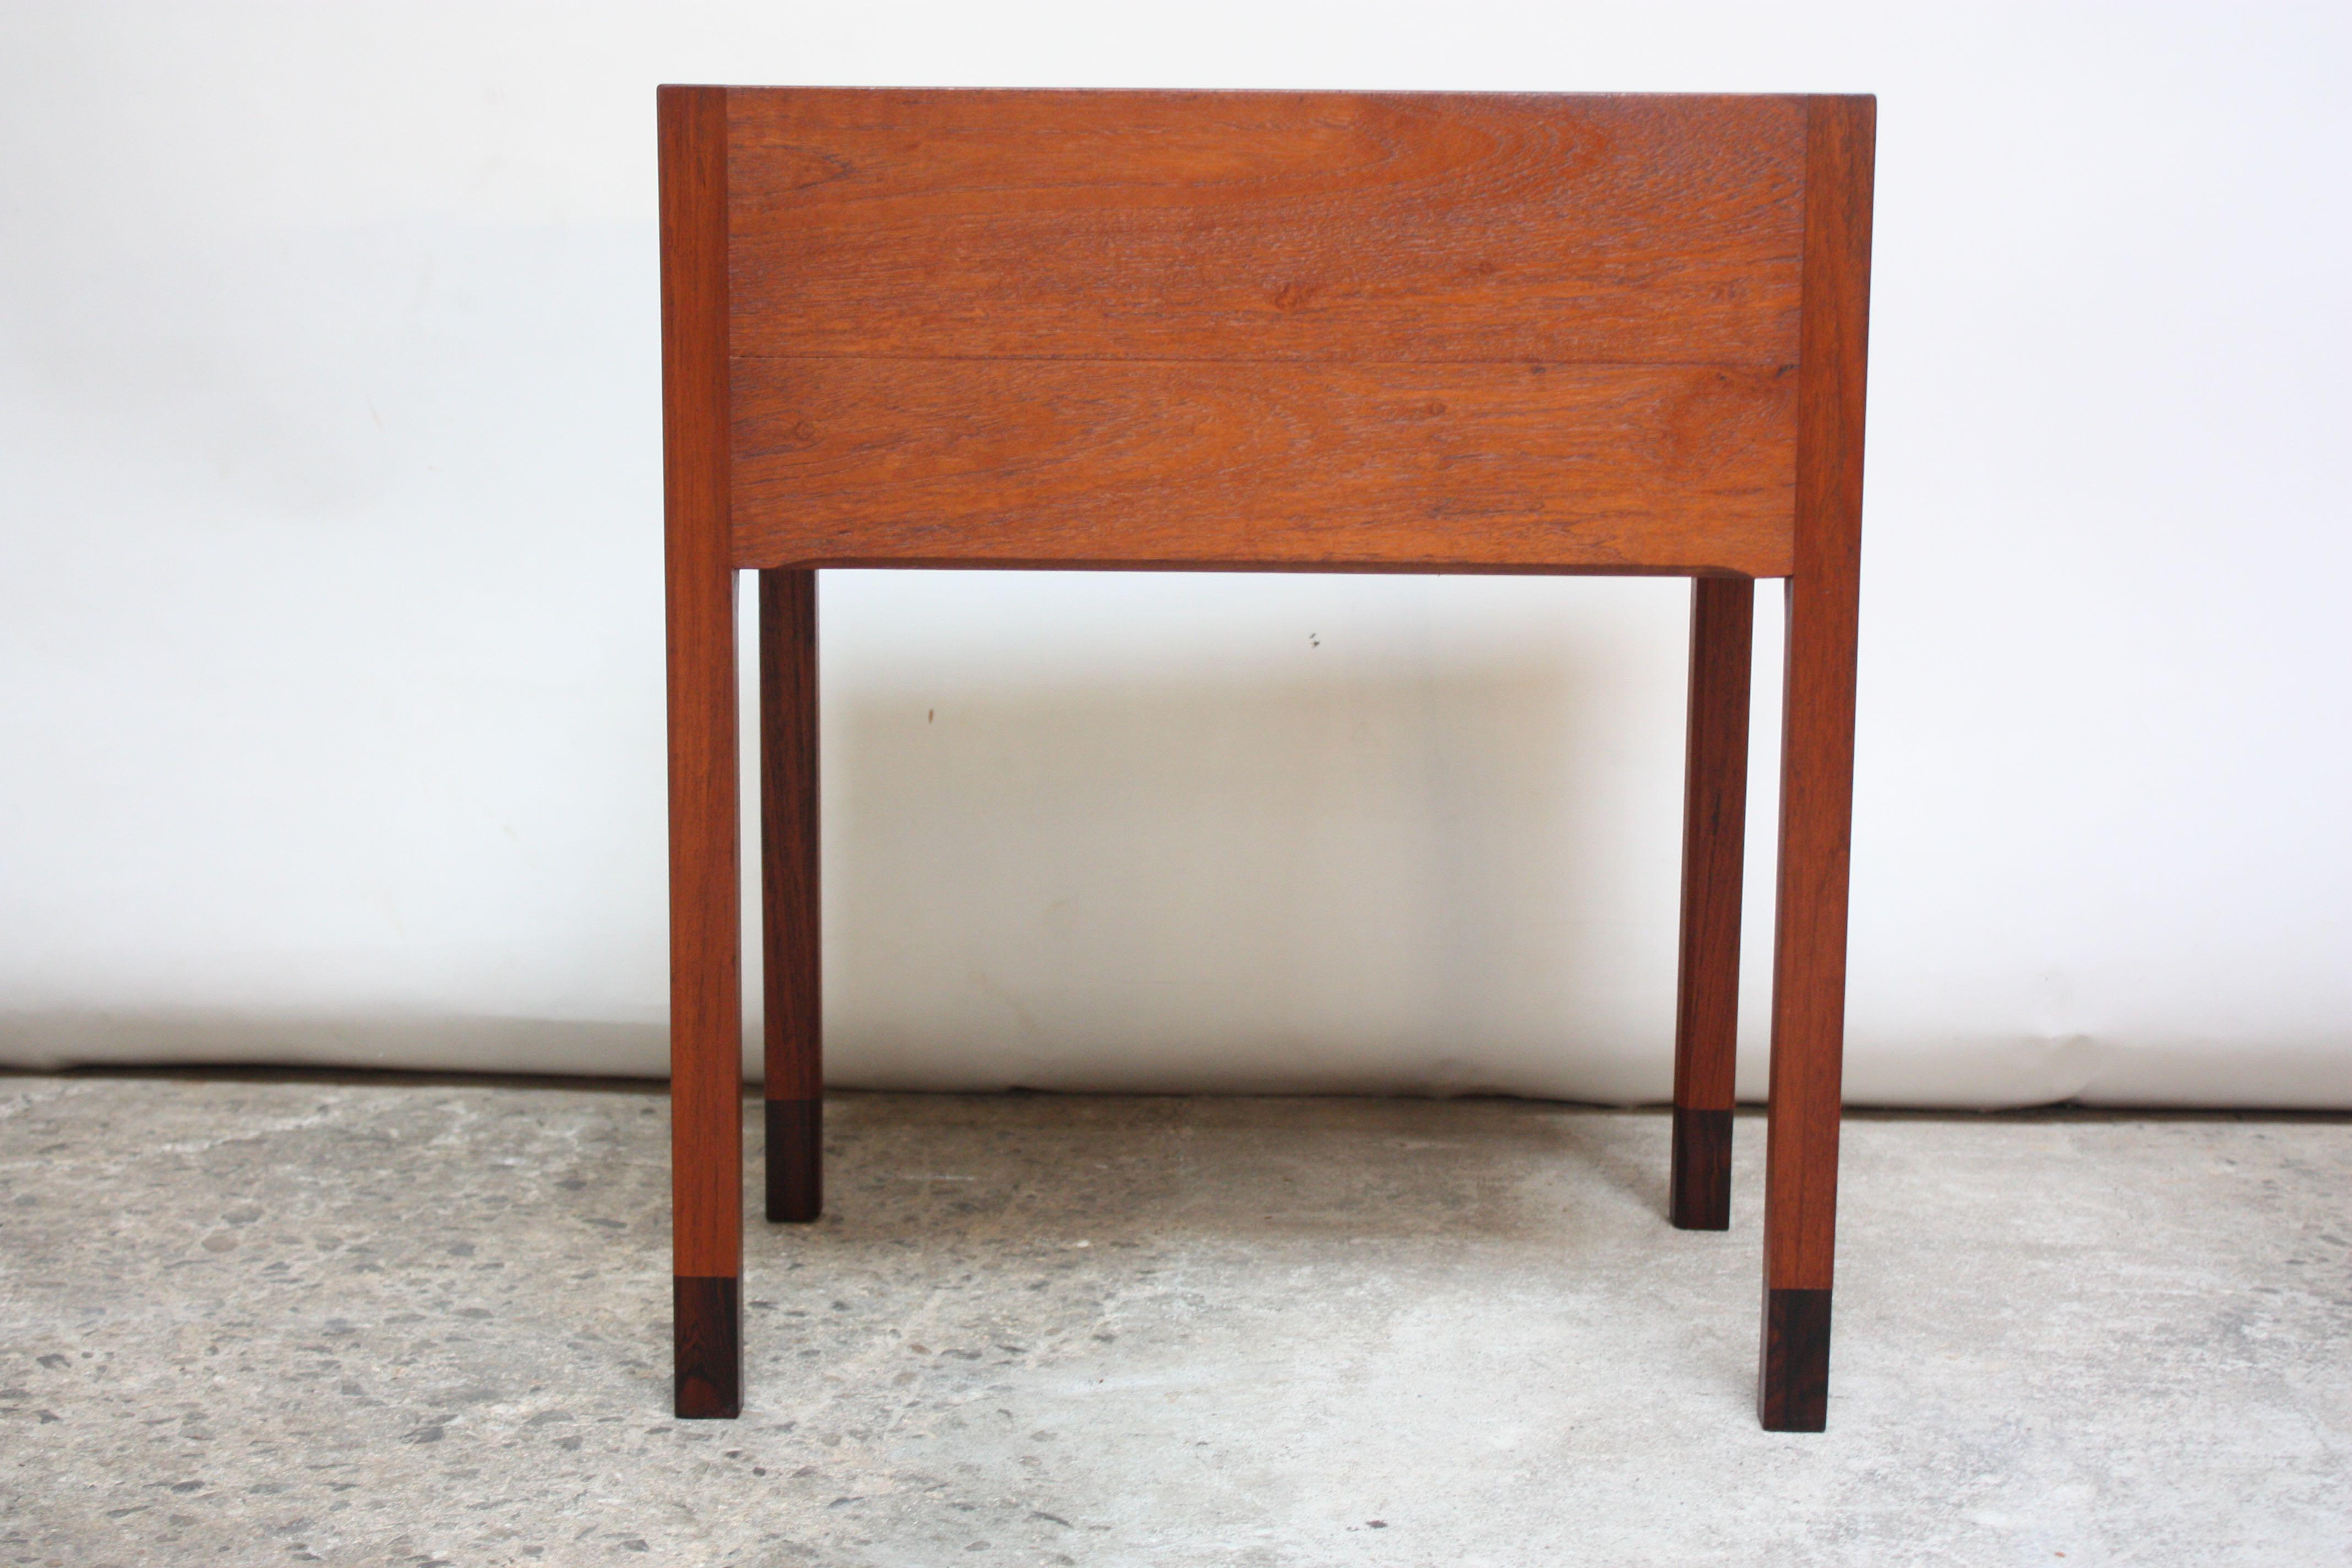 Mid-20th Century Danish Teak and Rosewood Side Table Designed for the Rigspolitiet Headquarters For Sale